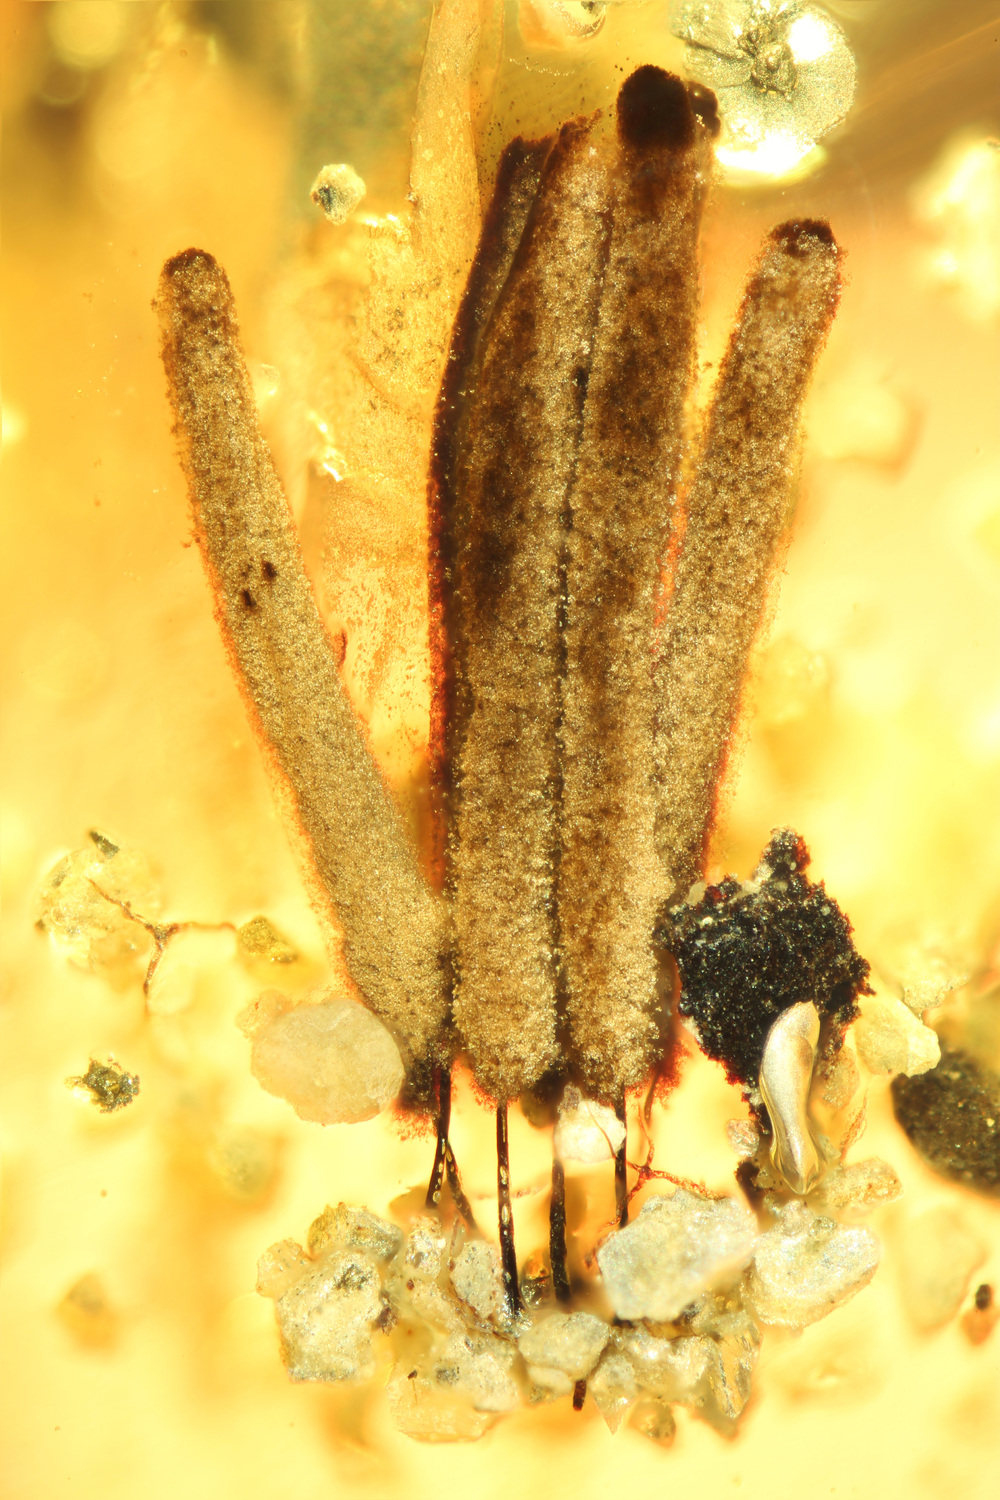 Group of several fruiting bodies of a slime mould (myxomycetes), around 2.5 millimetres long, in amber, which is about 100 million years old, from Myanmar: long-stalked fruiting bodies support the distribution of the spores, then as now.